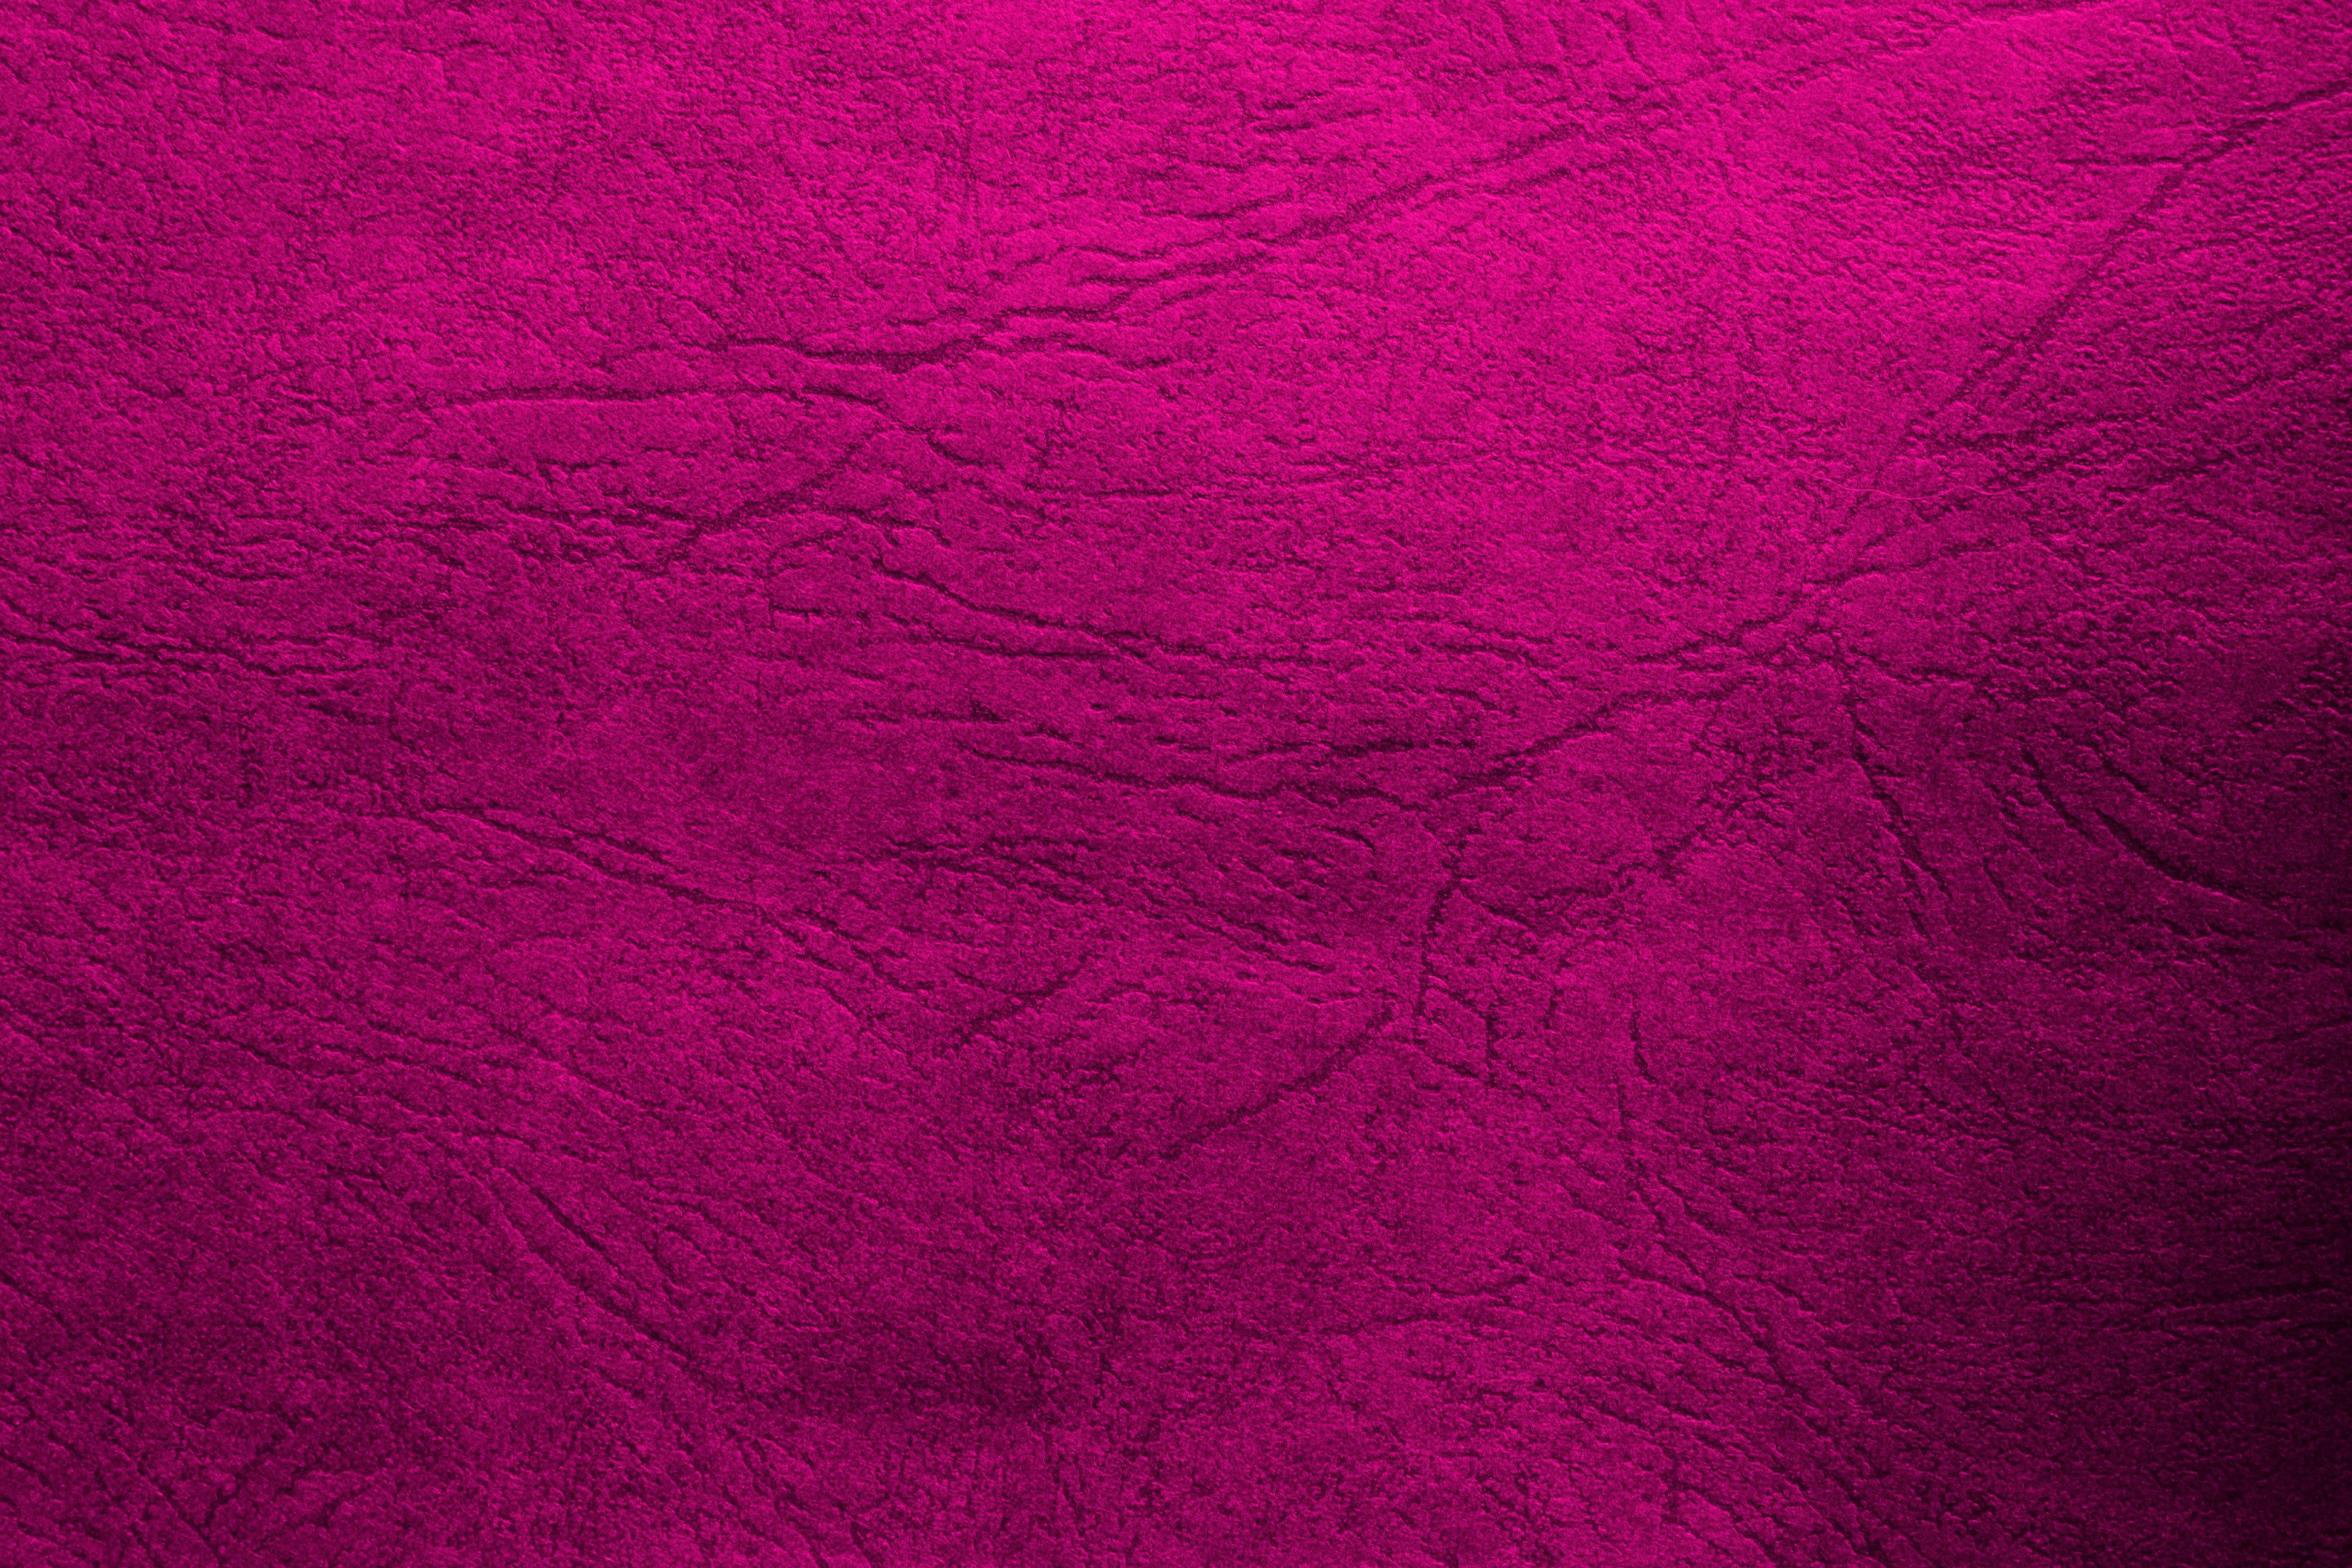 Hot Pink Leather Texture Picture. Free Photograph. Photo Public Domain